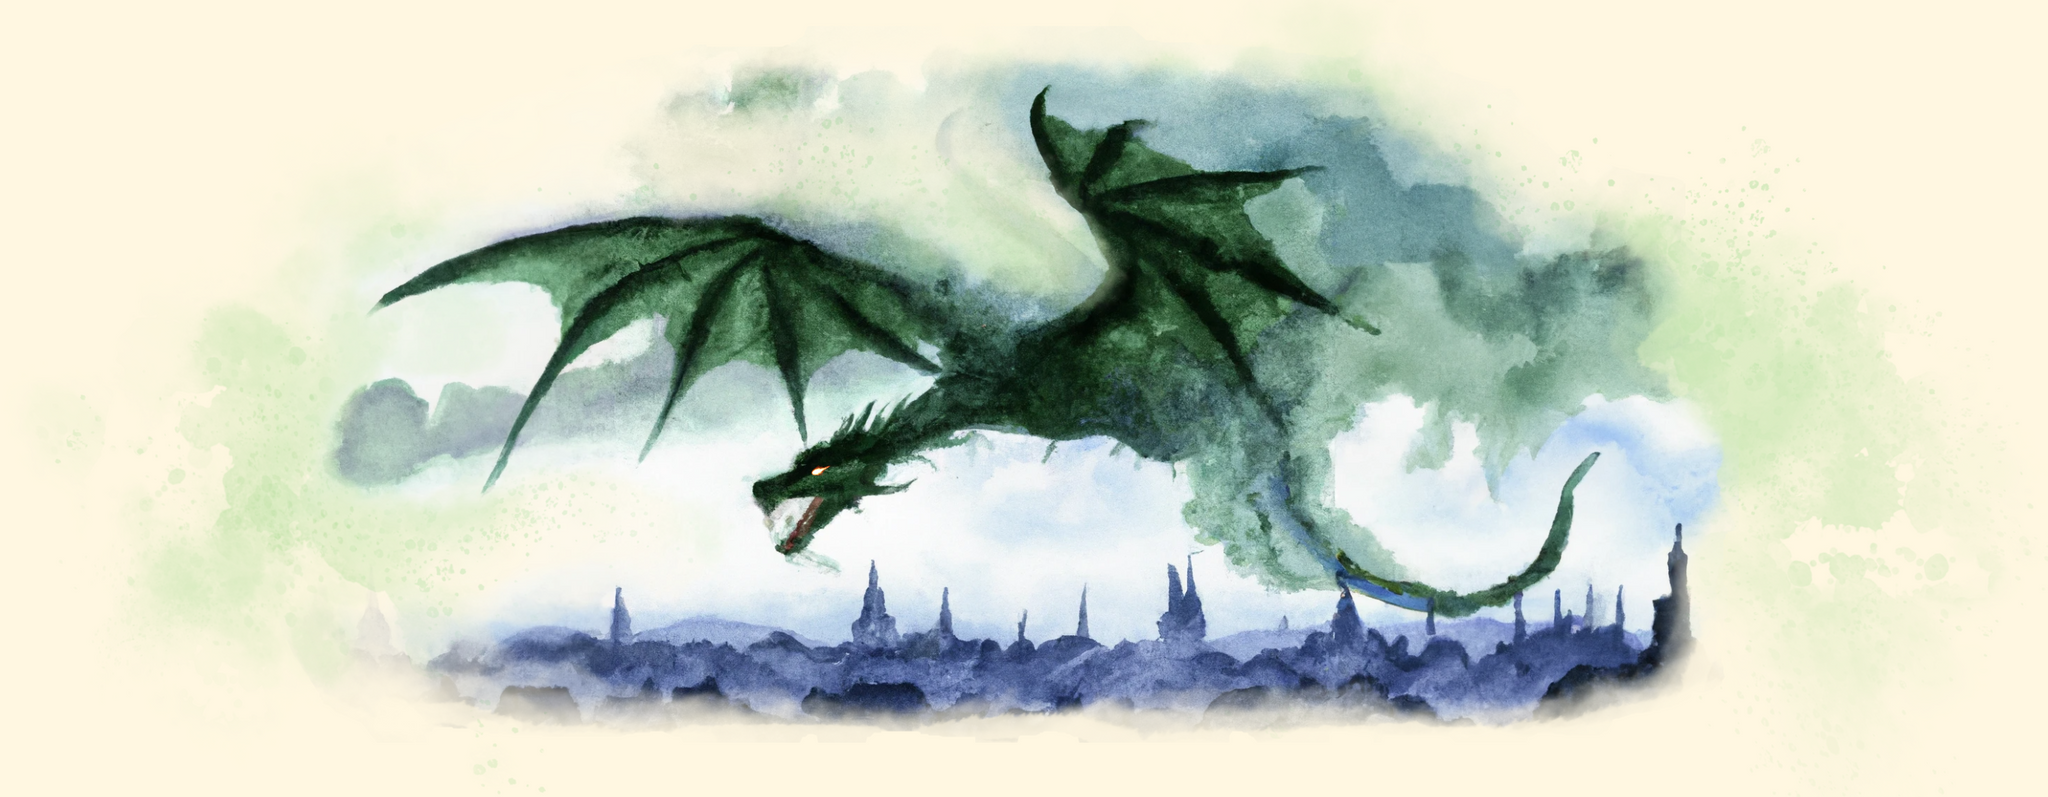 What is a Dungeon Master? DnD explained image of the BBEG green dragon terrorizing a town